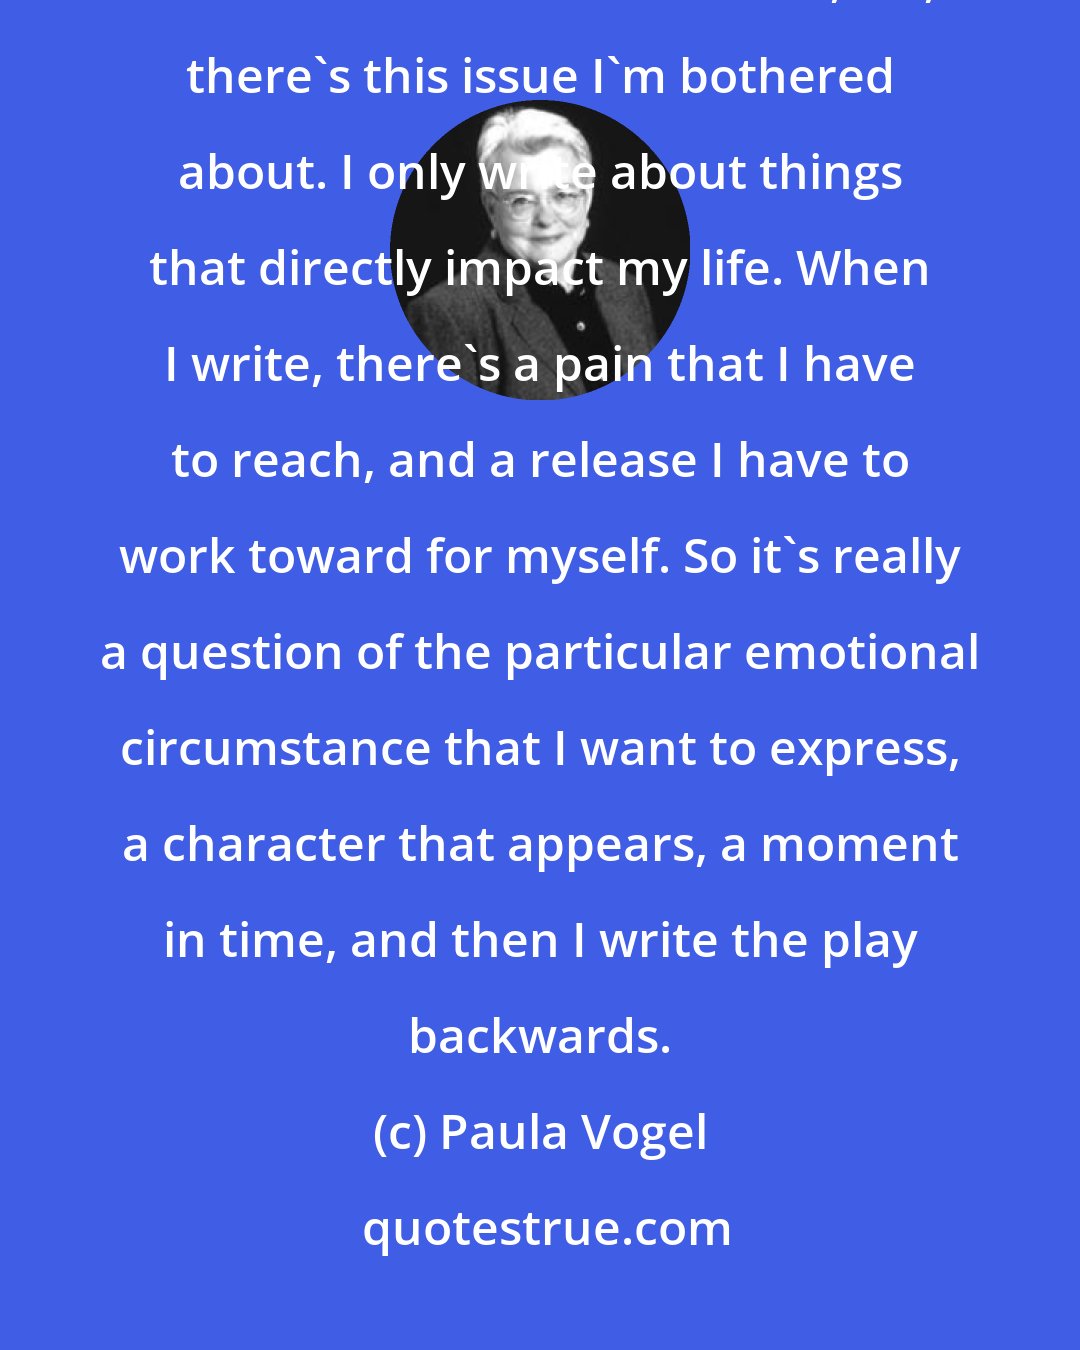 Paula Vogel: My writing isn't actually guided by issues. I know it seems that way, but I don't sit down and think, Oh, there's this issue I'm bothered about. I only write about things that directly impact my life. When I write, there's a pain that I have to reach, and a release I have to work toward for myself. So it's really a question of the particular emotional circumstance that I want to express, a character that appears, a moment in time, and then I write the play backwards.